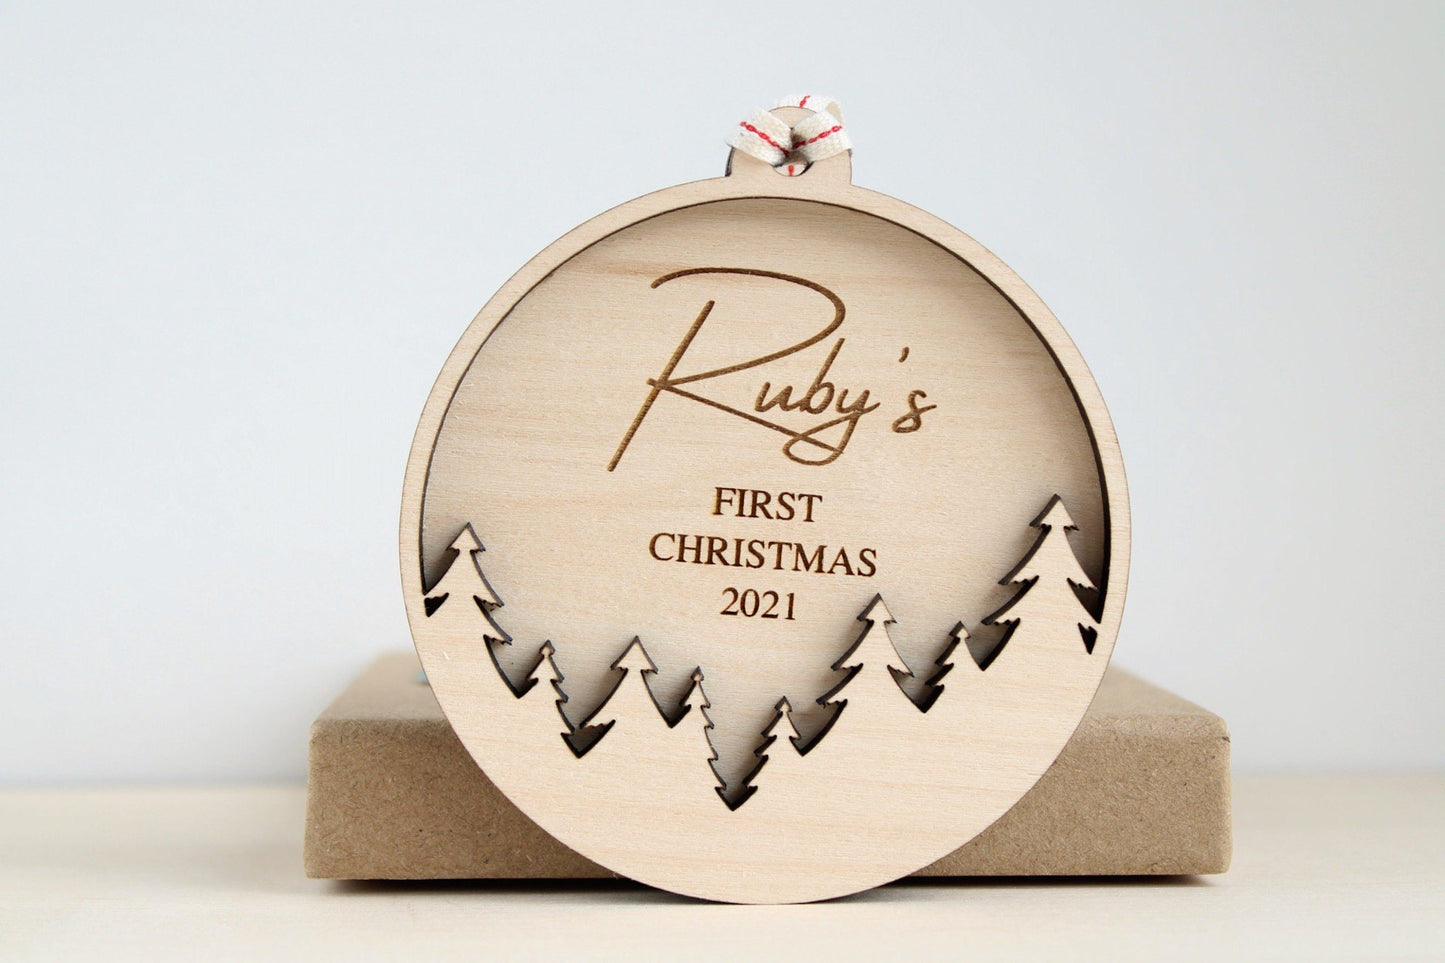 First Christmas bauble with tree design